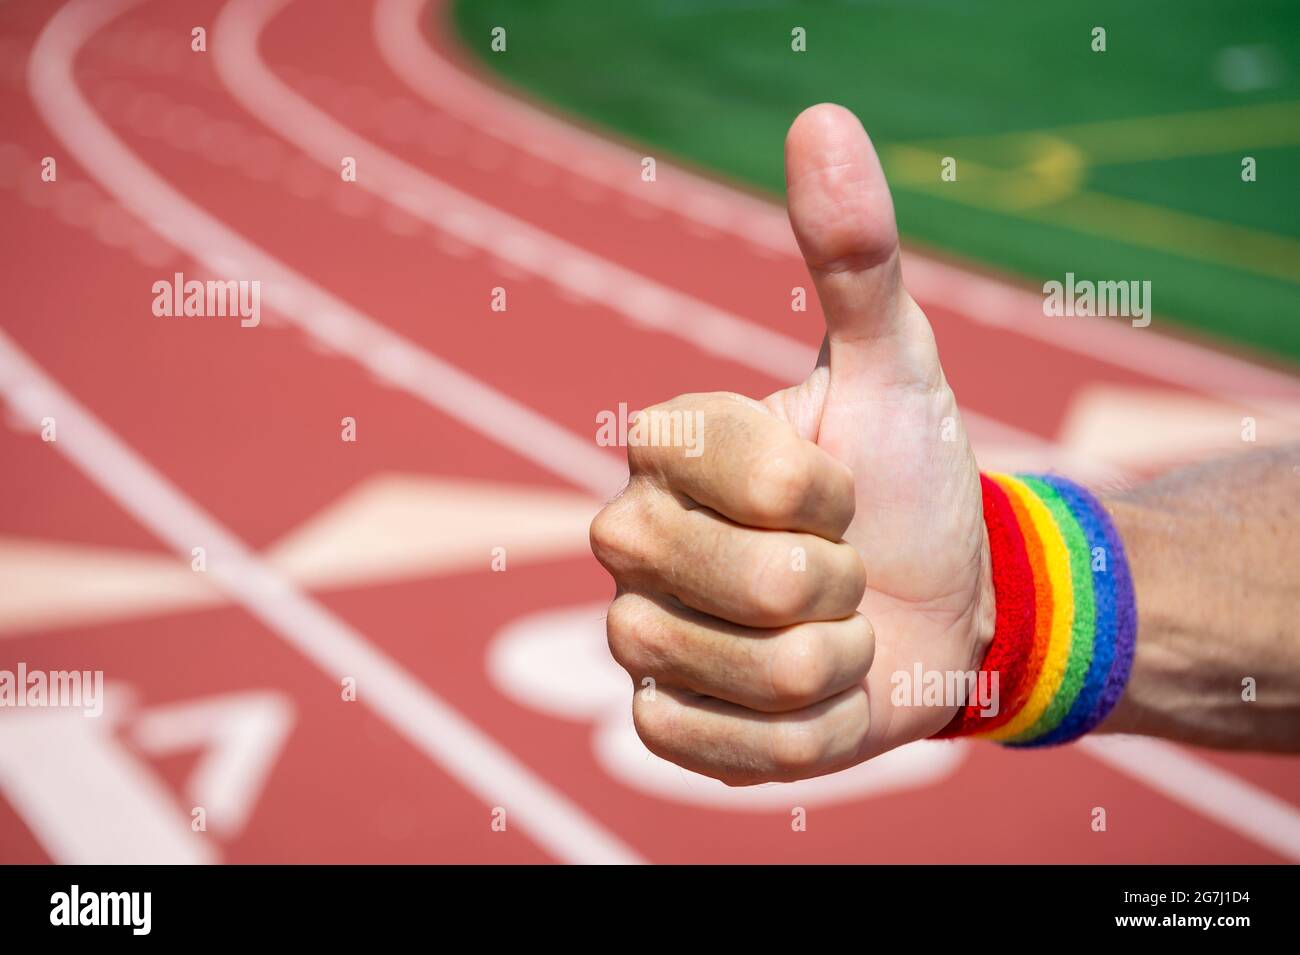 Gay athlete with rainbow pride  wristband gives thumbs up gesture in front of a sports track background Stock Photo